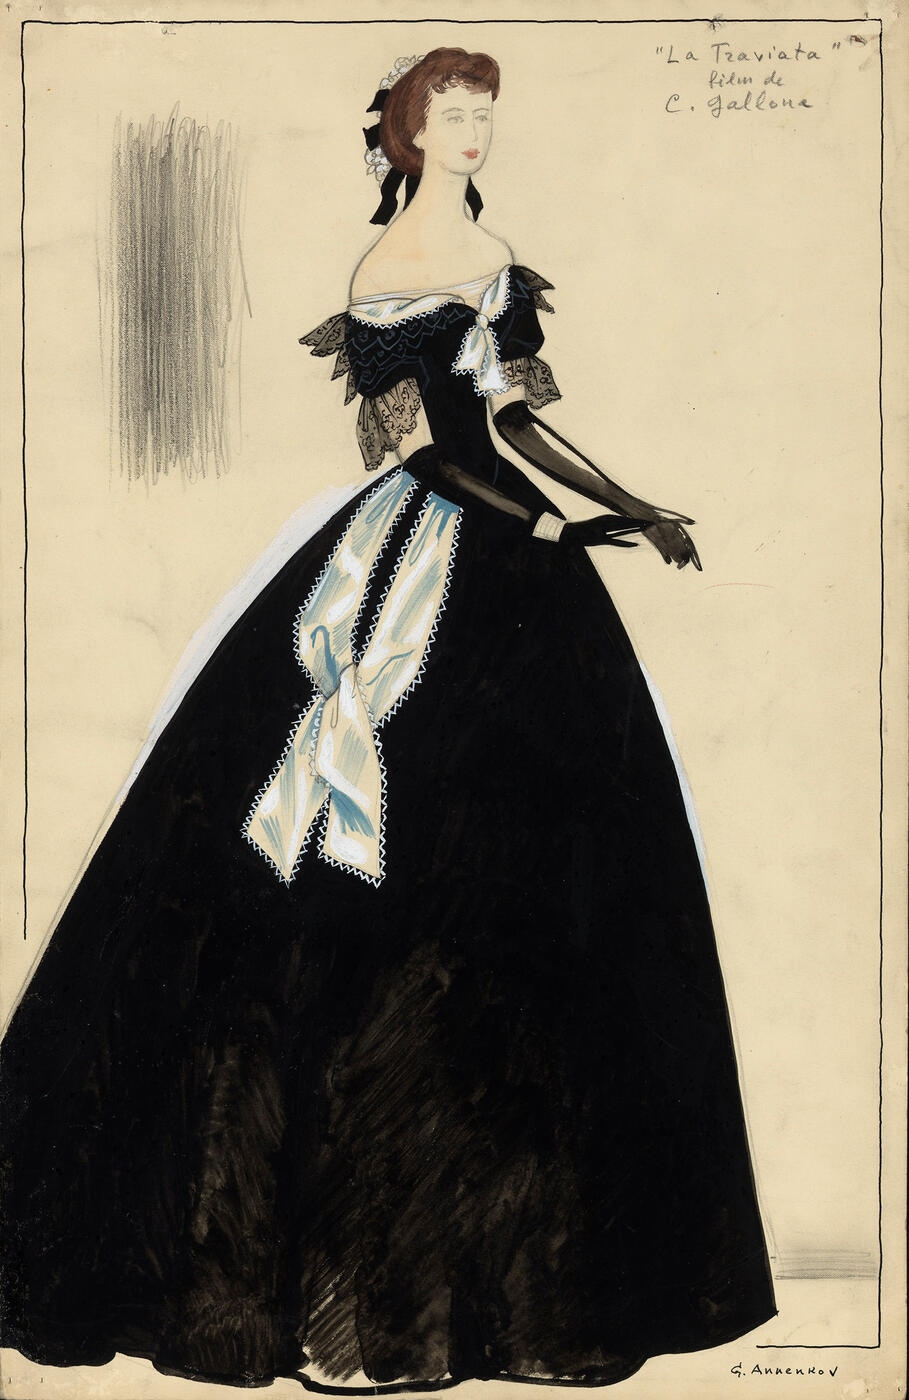 Lady in a Black Gown, Costume Design for the Film "La Signora Dalle Camelie" by Carmine Gallone